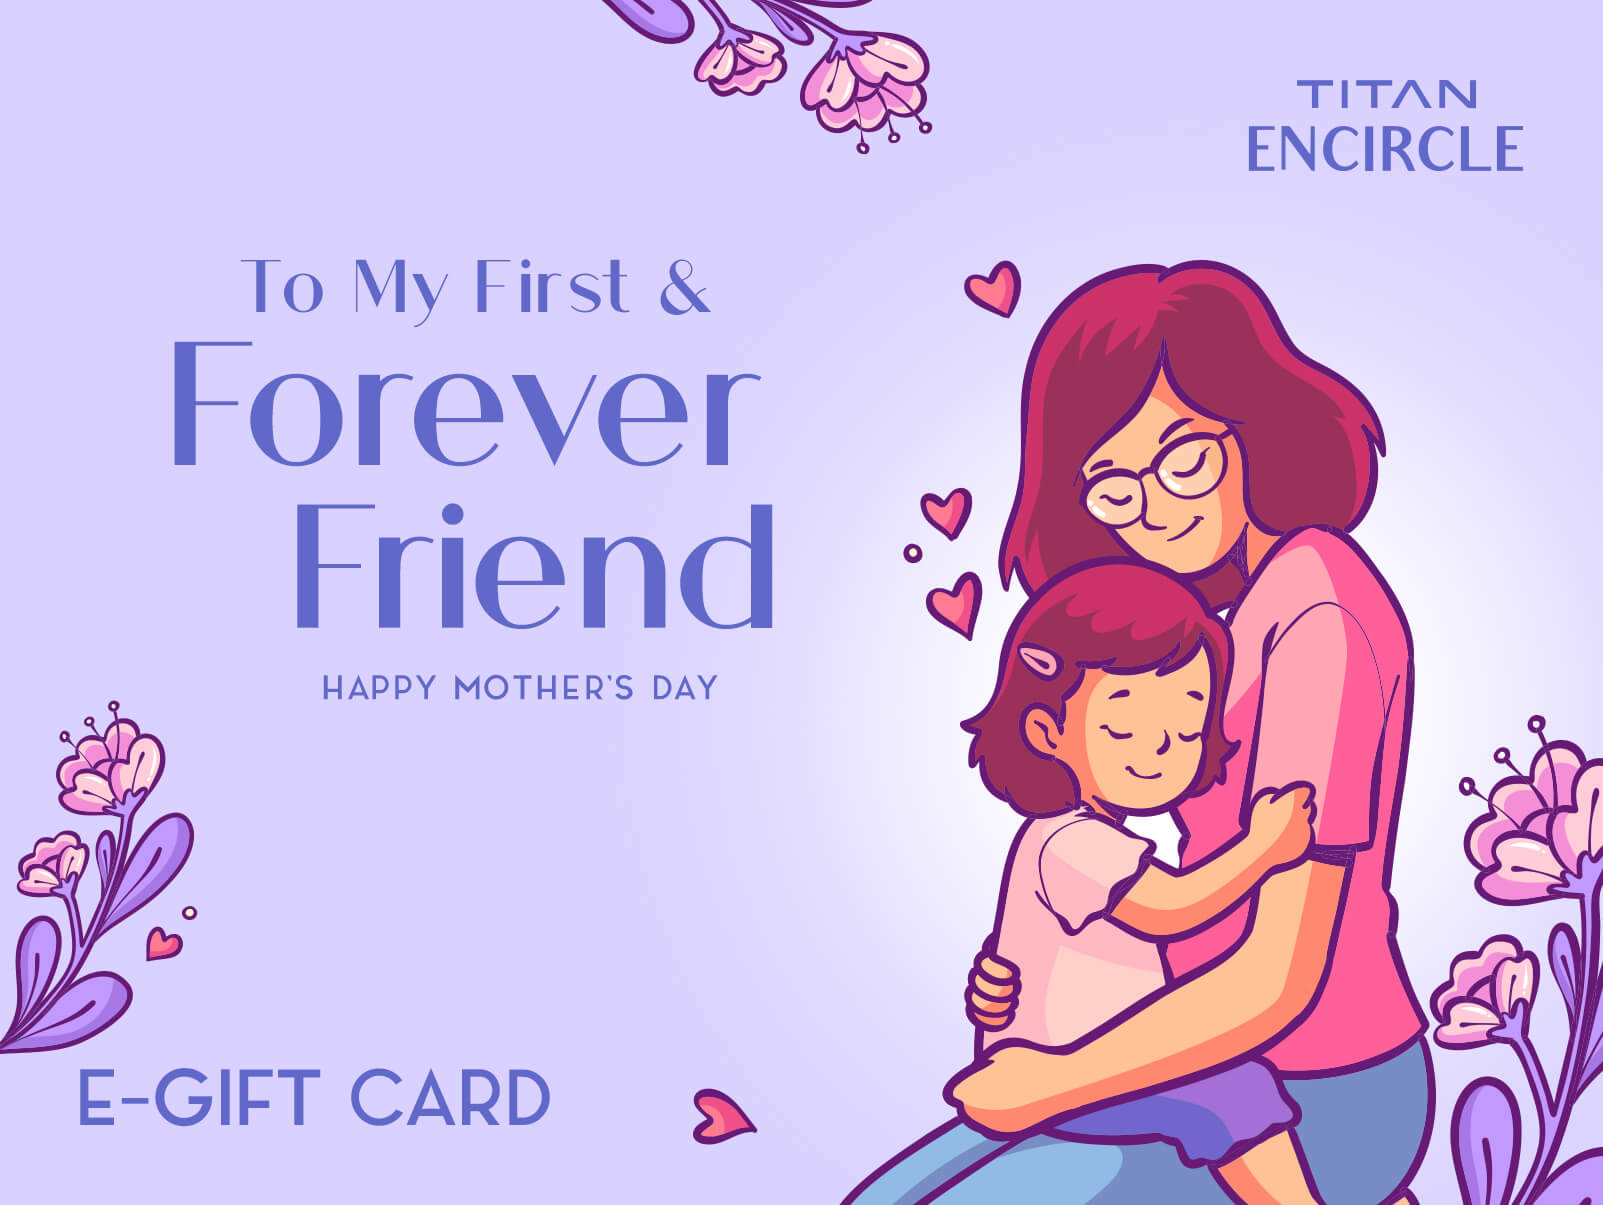 Purchase E Gift Card on Mothers Day